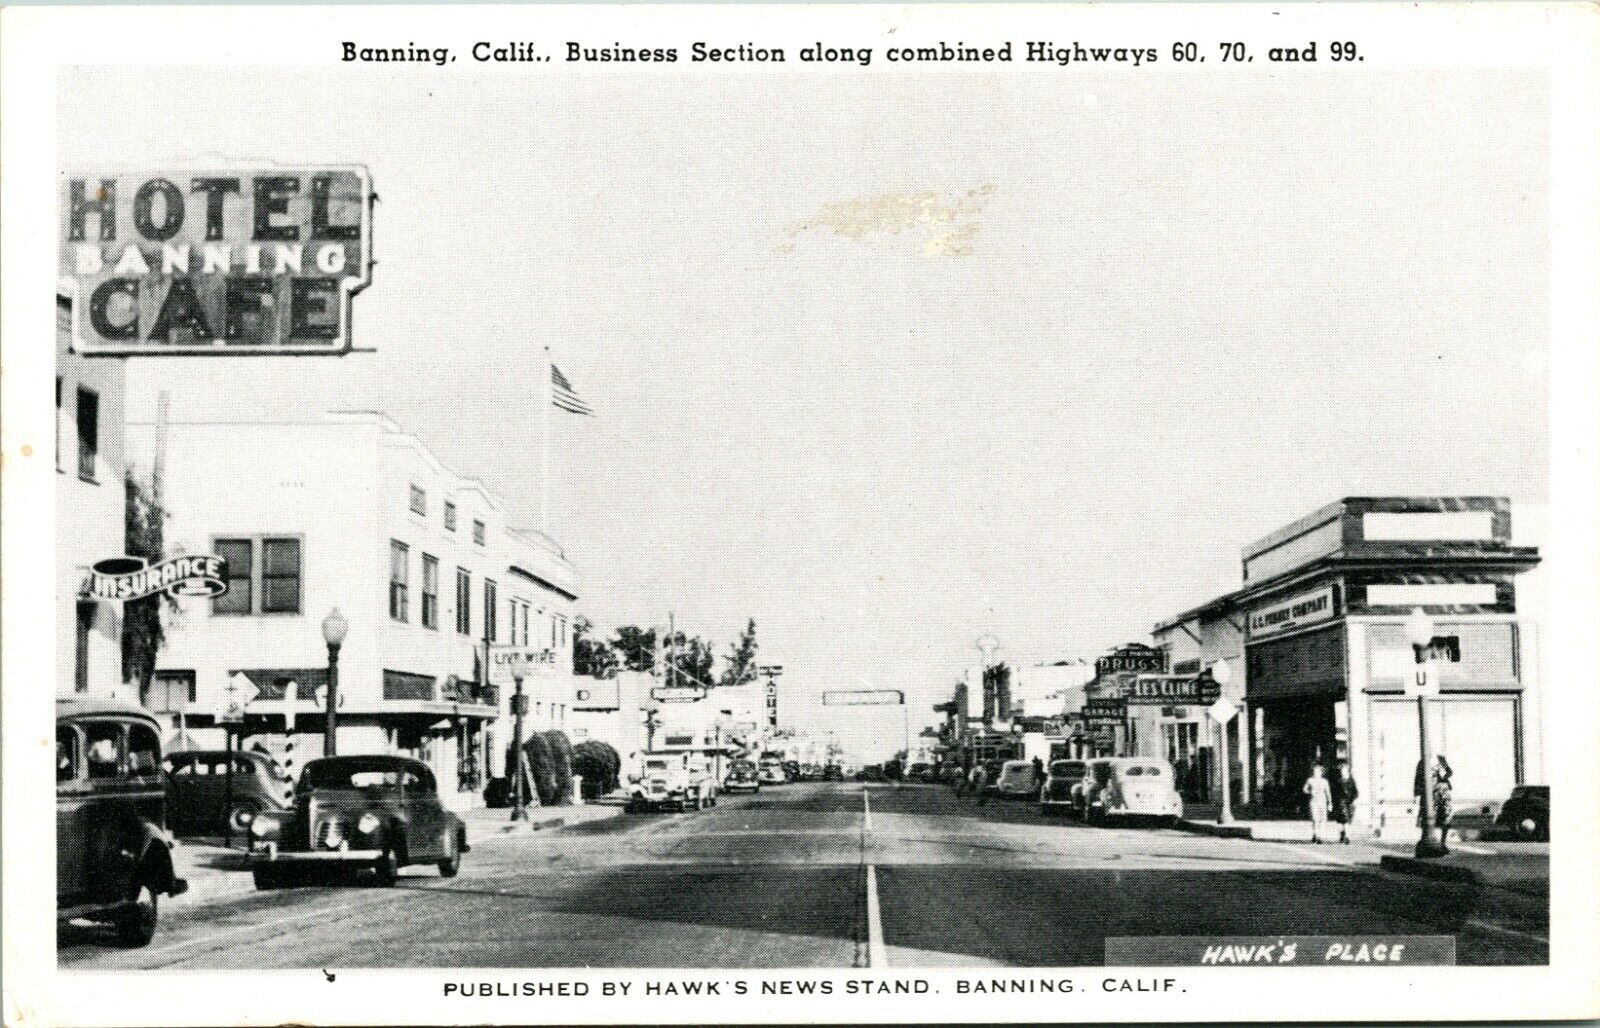 Vtg Banning California Business Section Along Combined Highways 60 70 99